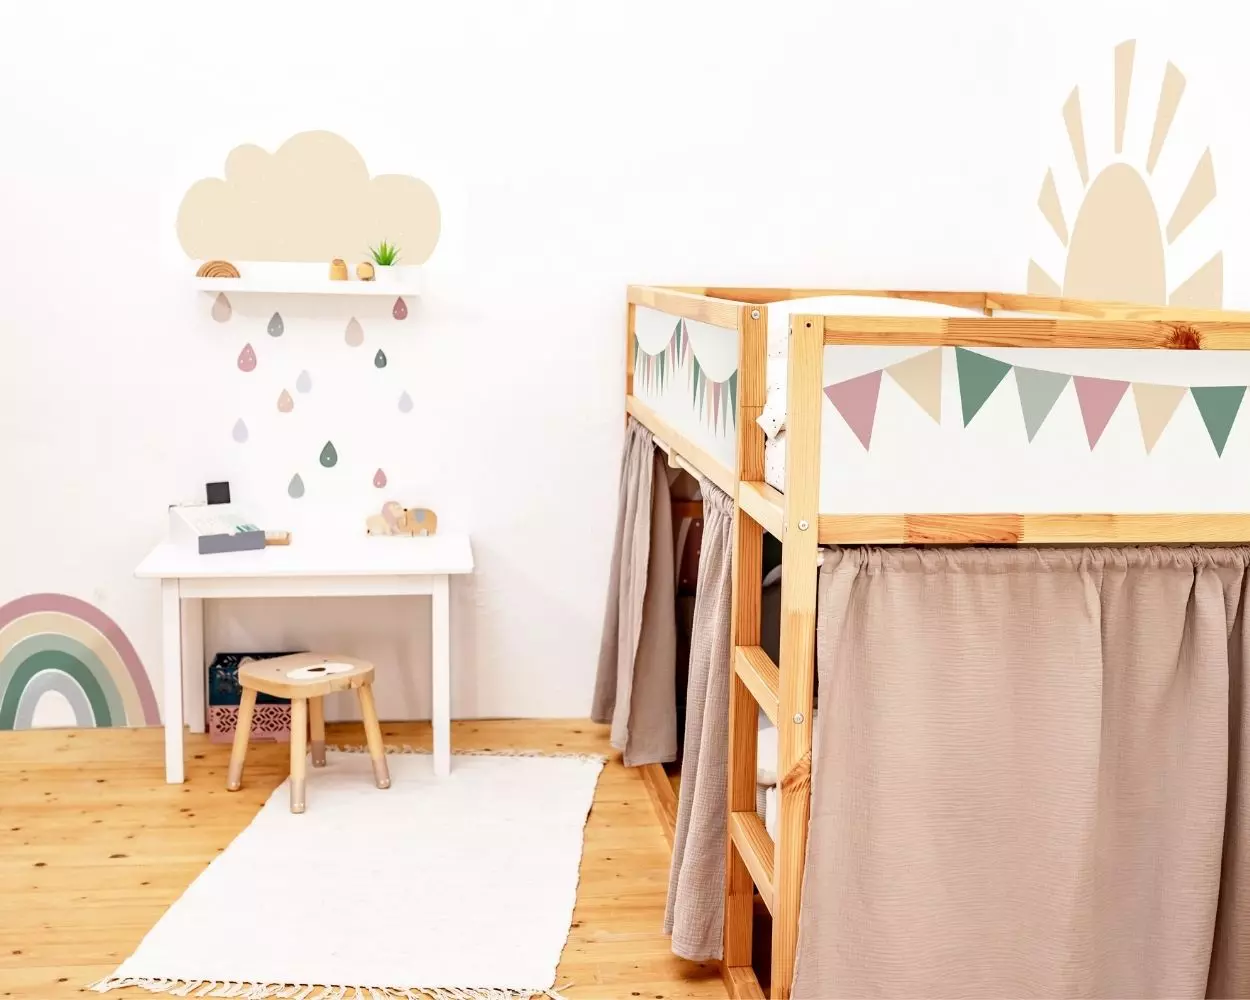 How do I furnish my child's room properly? 7 tips and tricks